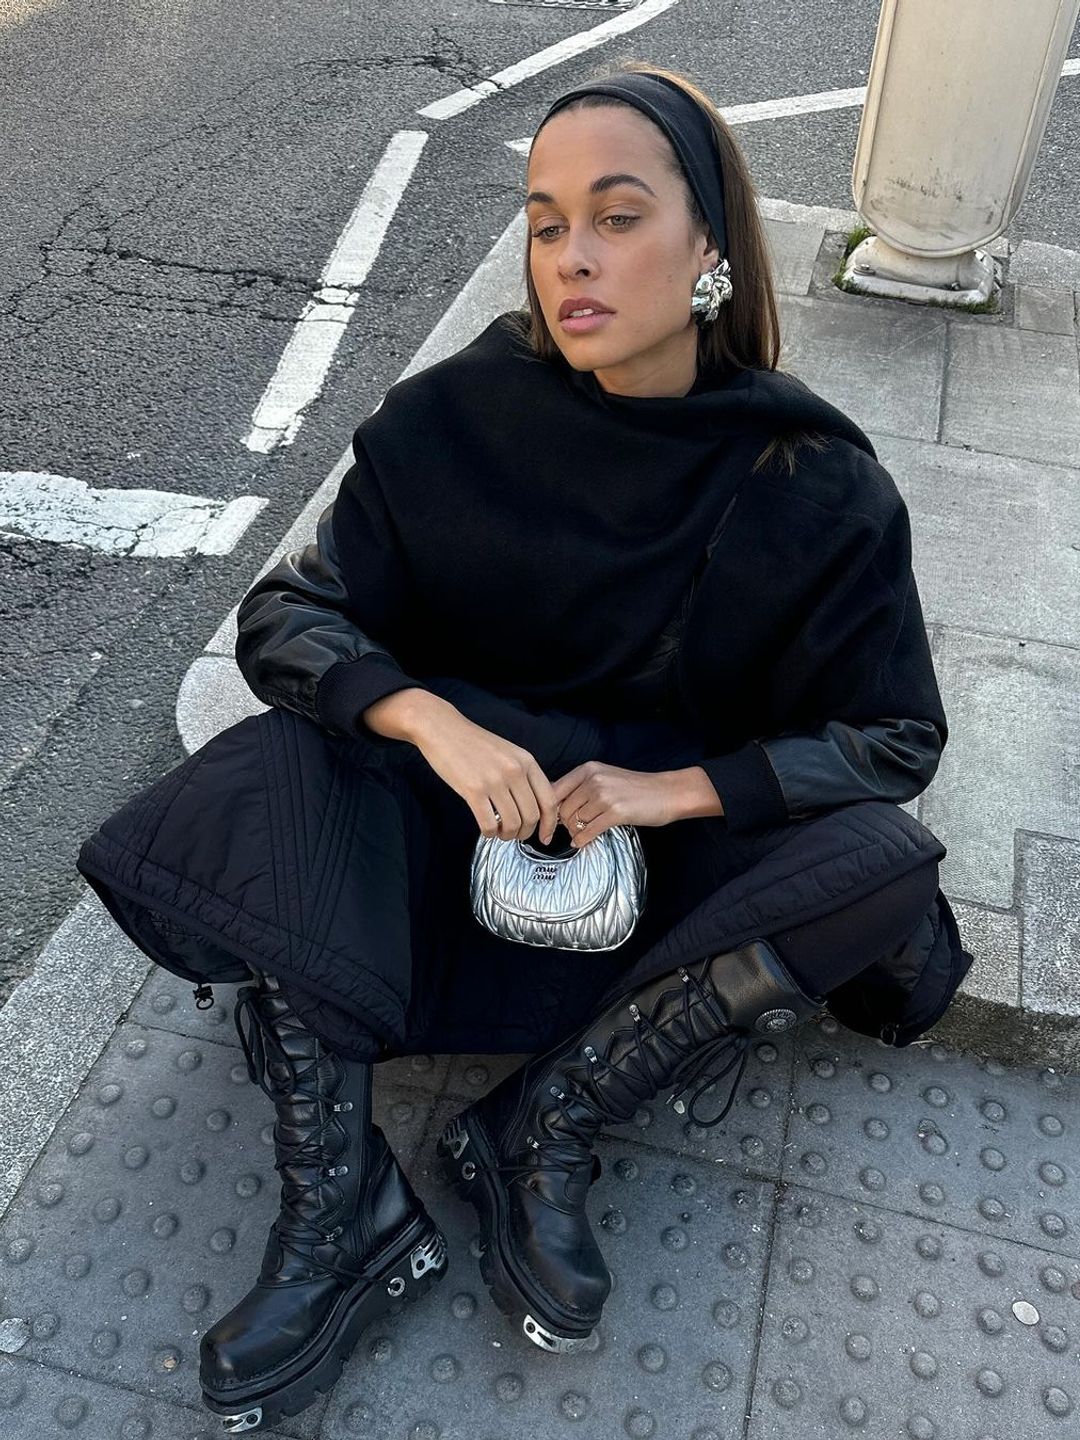 Sarah Lysander wears an all black outfit to sit on a curb in London and accessorises her outfit with a silver metallic Miu Miu bag and bold earrings 